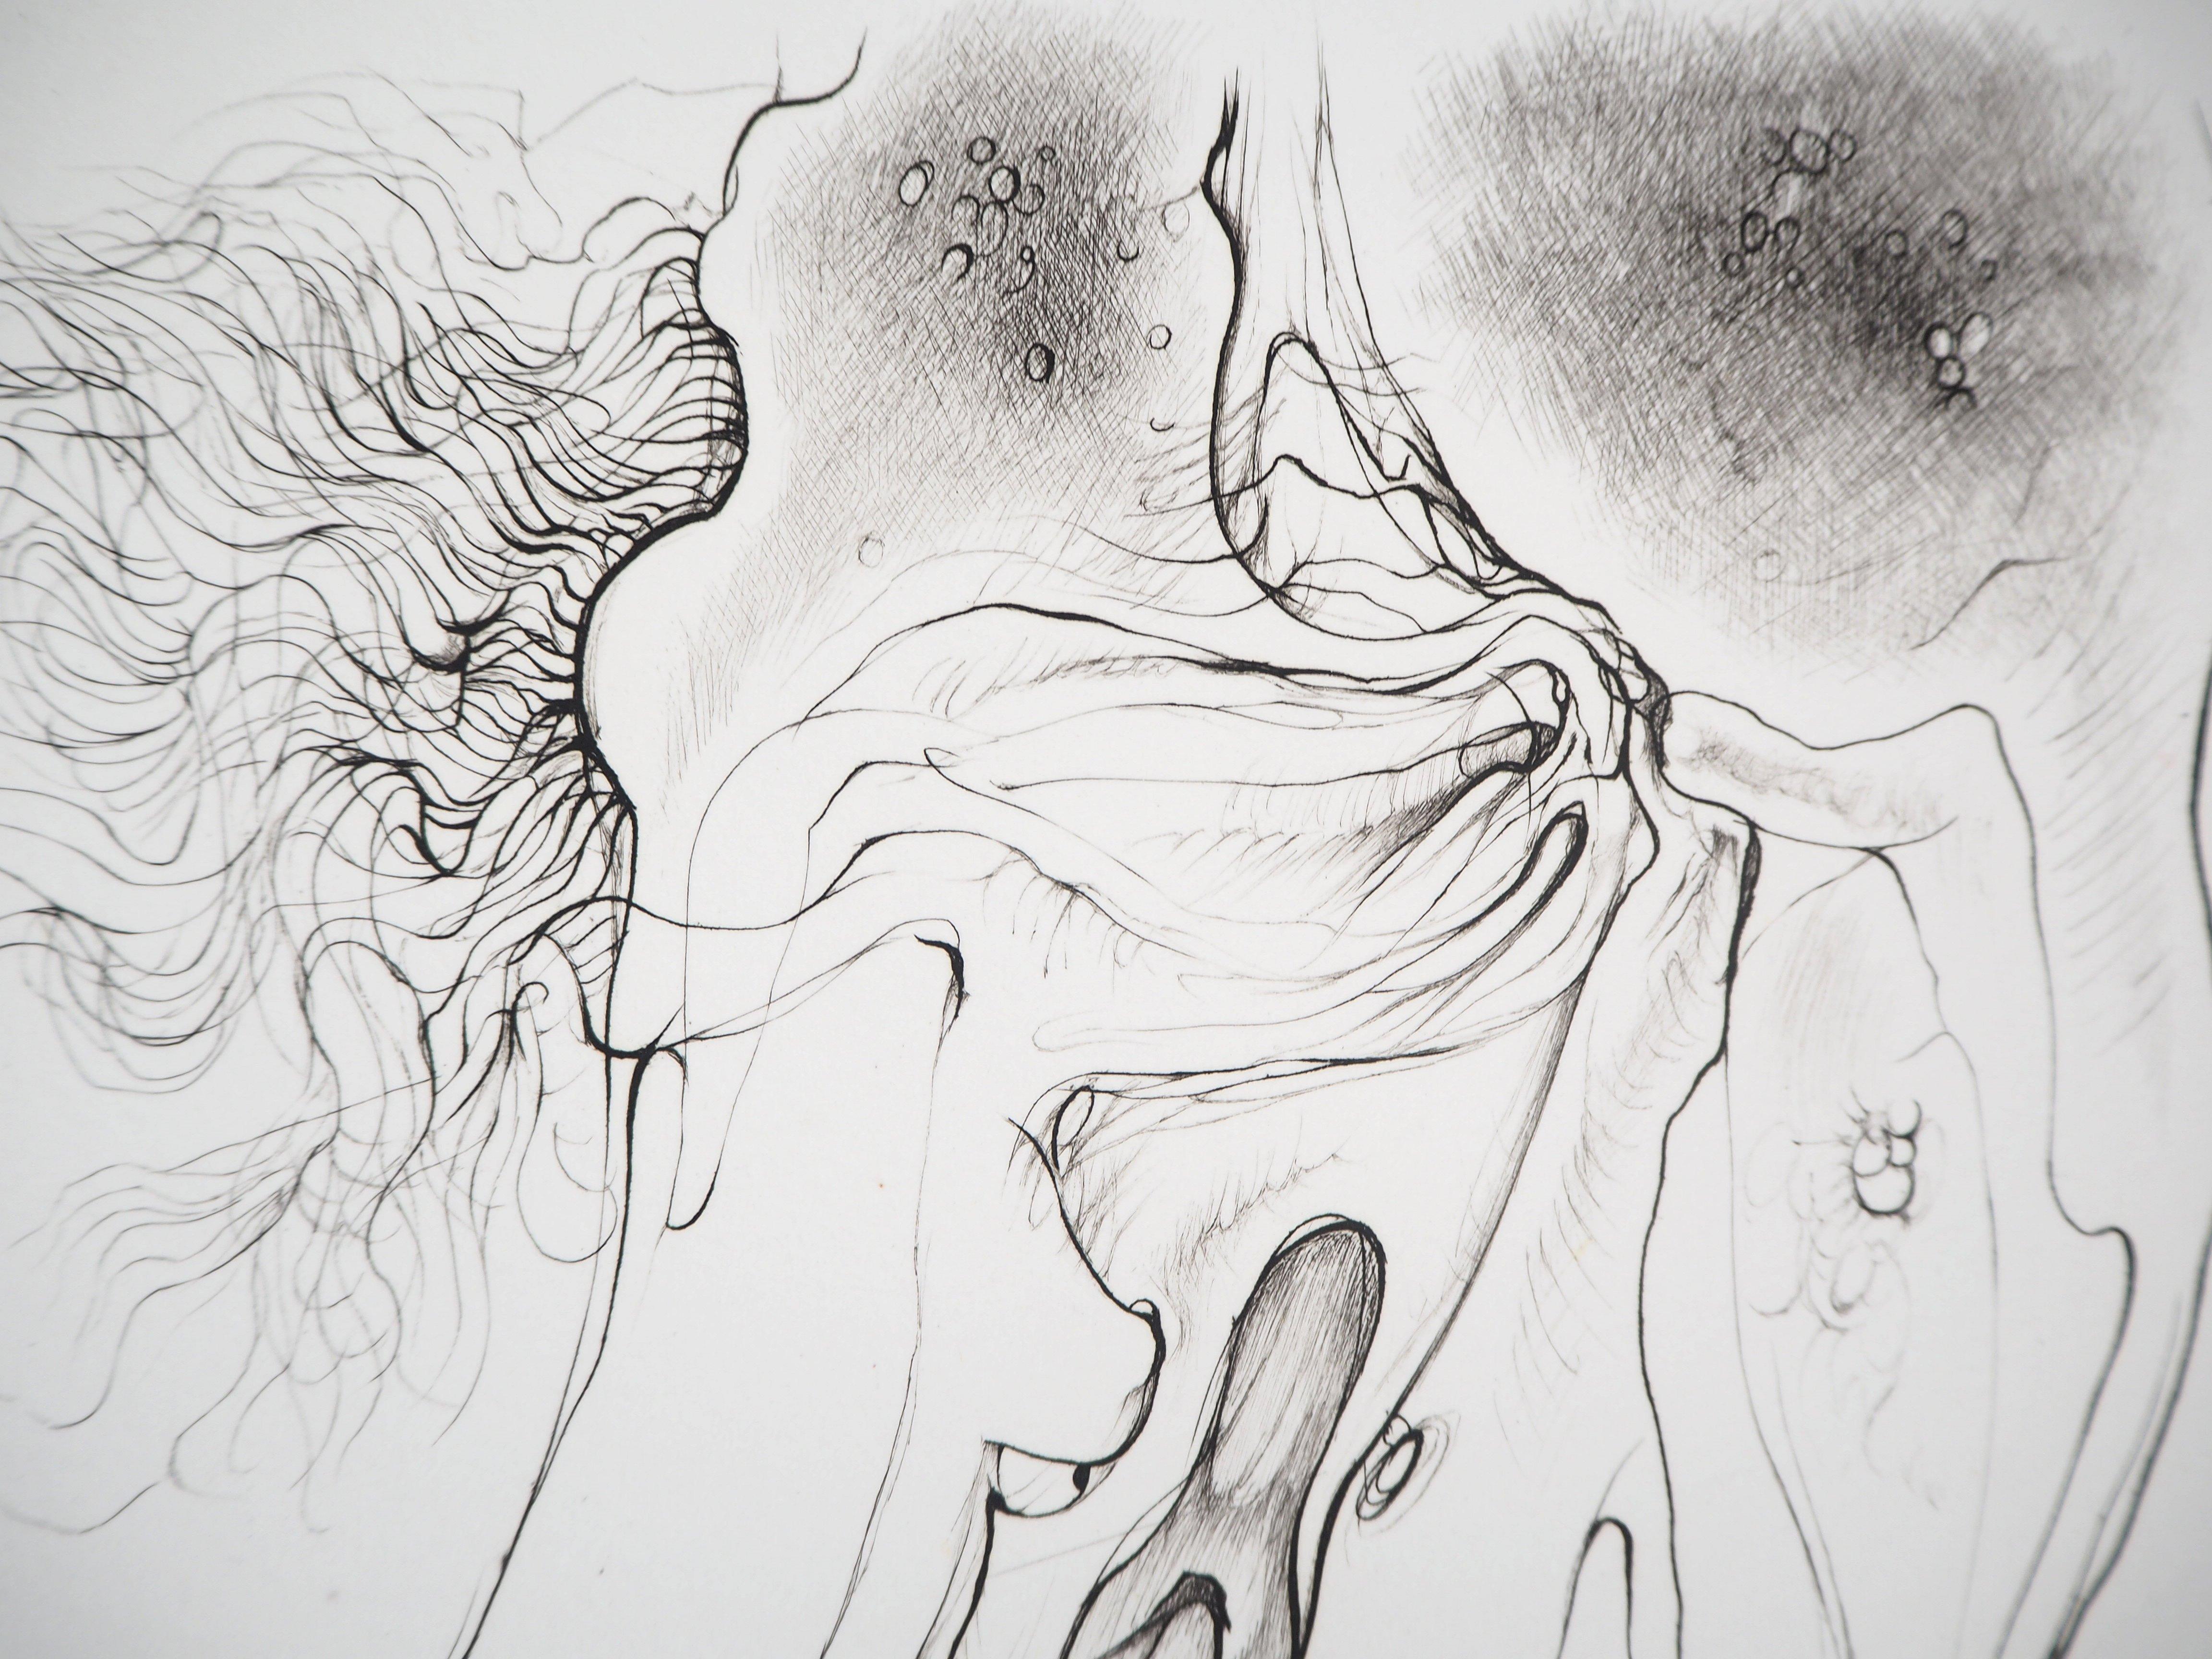 Hans BELLMER
The Lovers

Original etching, 1973
Handsigned in pencil by the artist
On Auvergne paper, 57 x 38 cm (22,4 x 14,9 inches)

From the Portfolio 